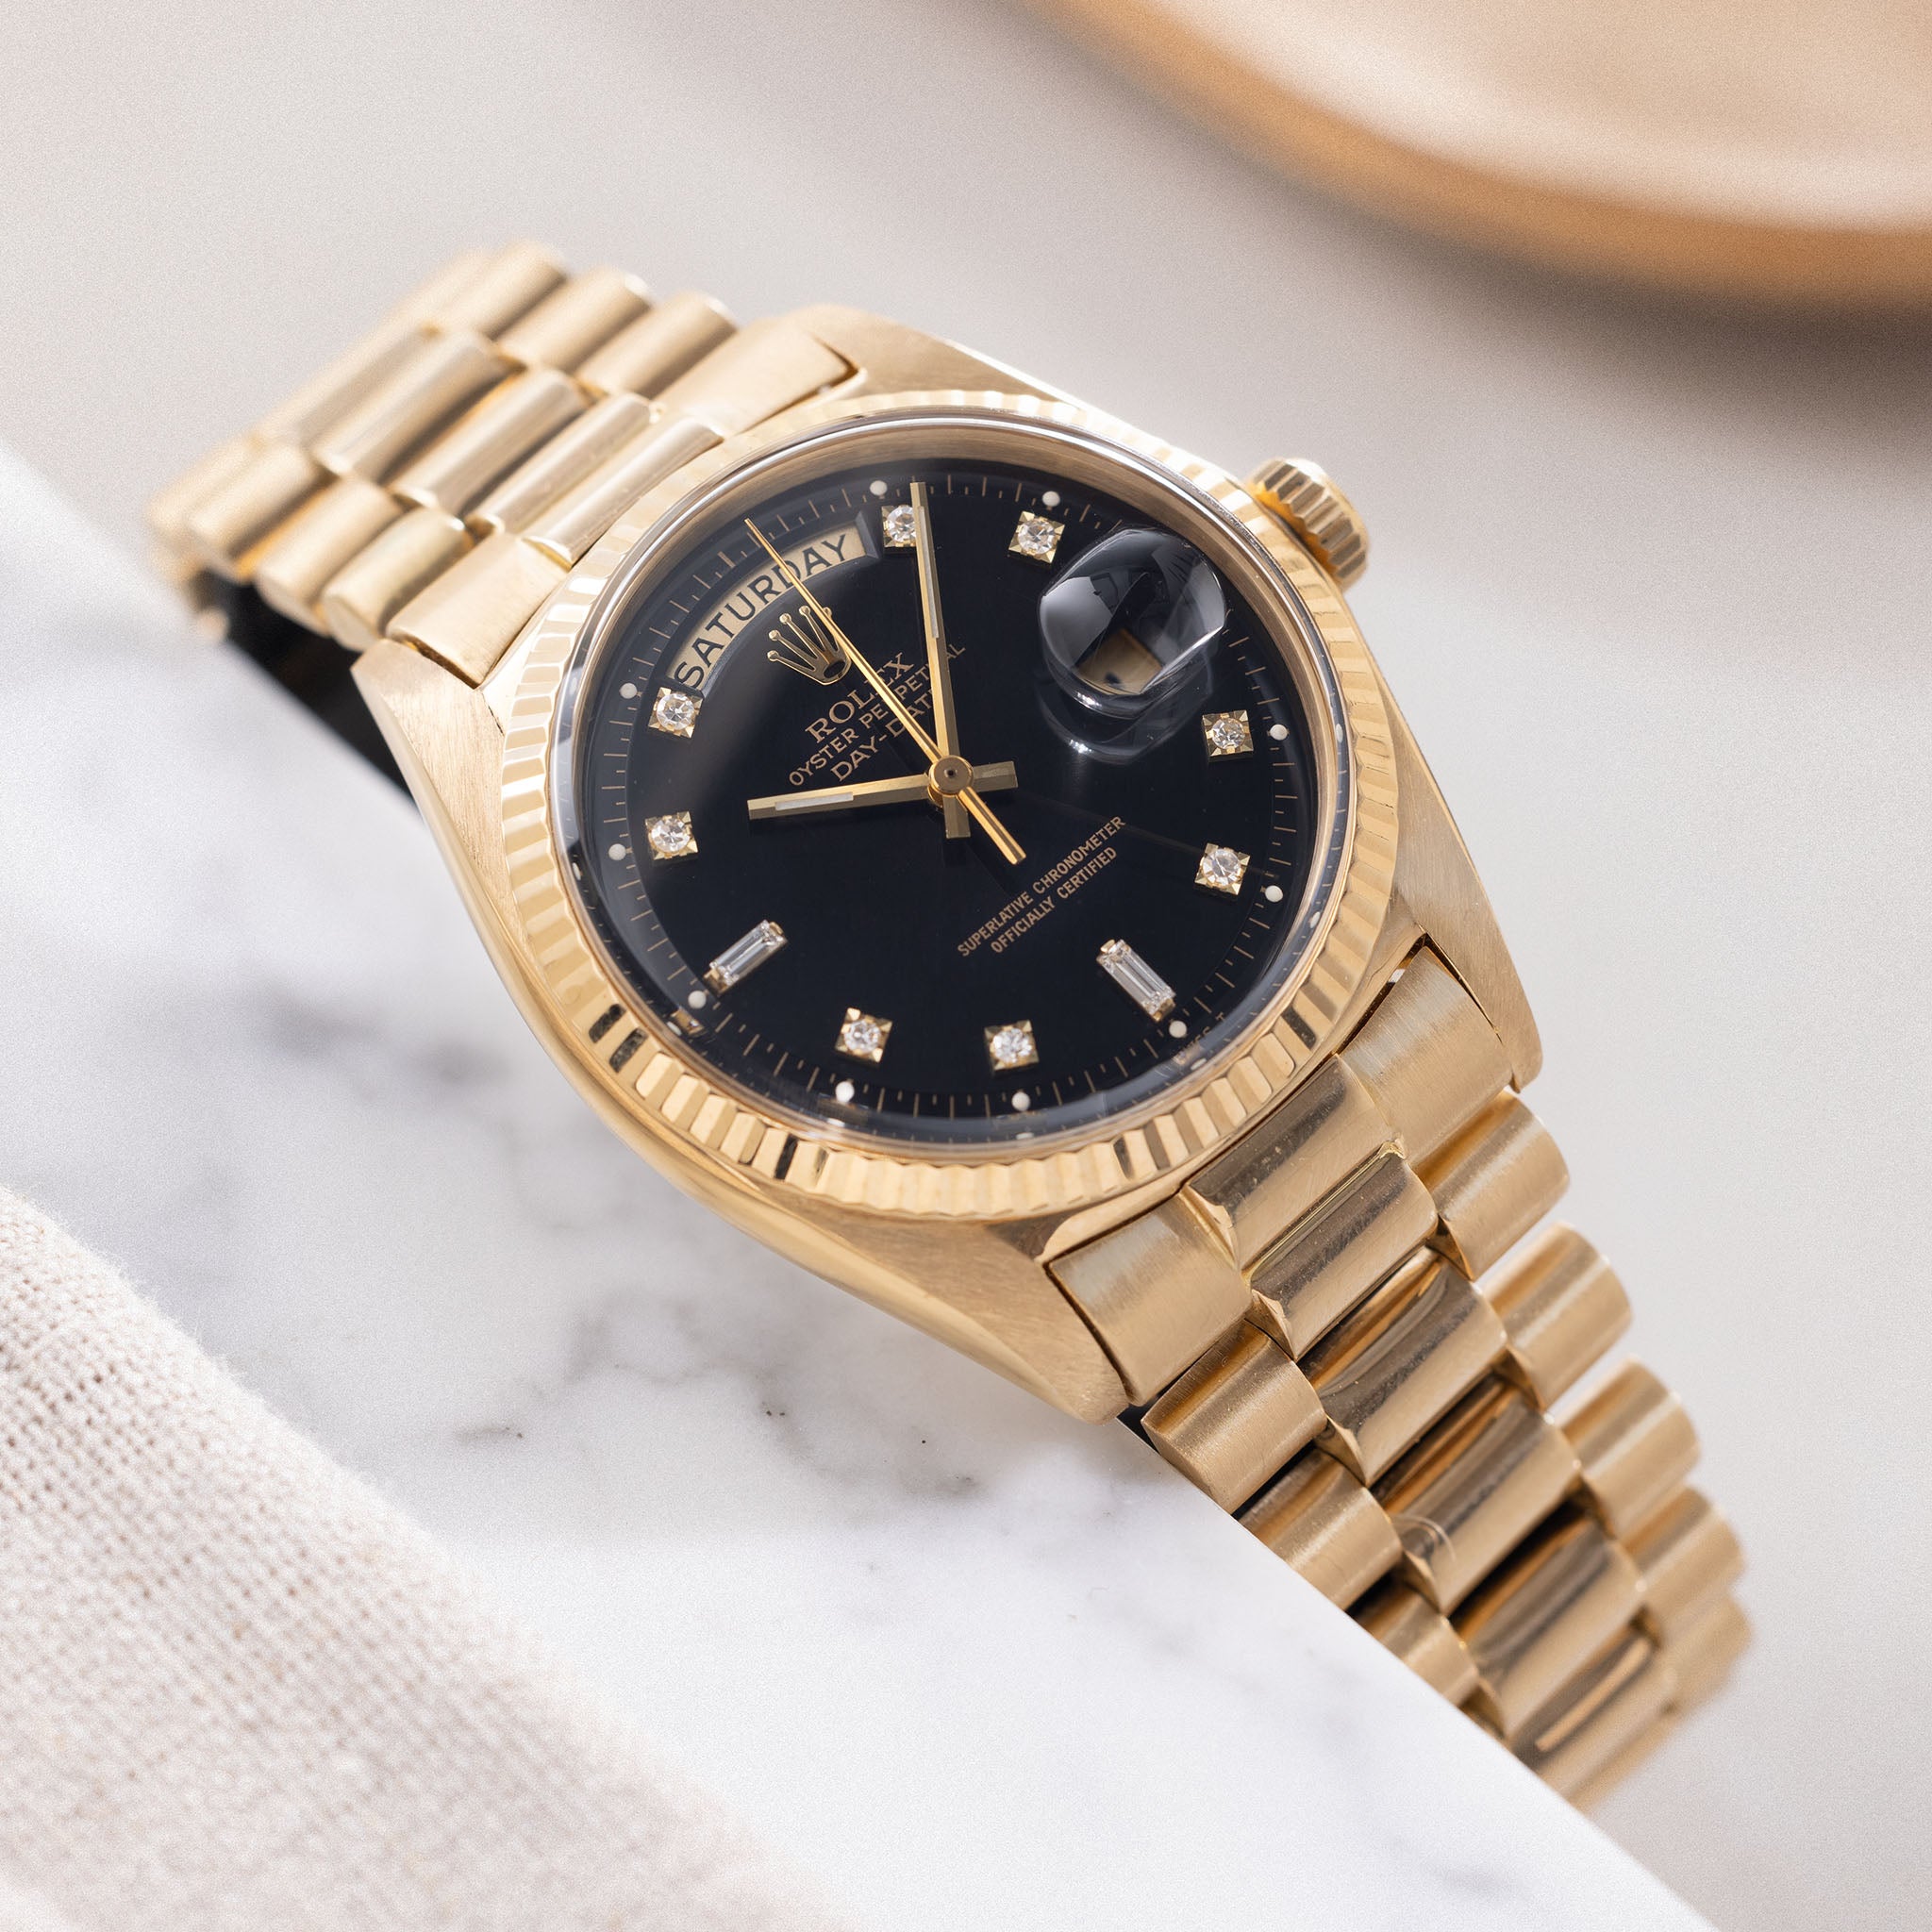 Rolex Day-Date Yellow Gold Black Diamond Hours Dial ref 1803Rolex Day-Date Yellow Gold Black Diamond Hours Dial ref 1803